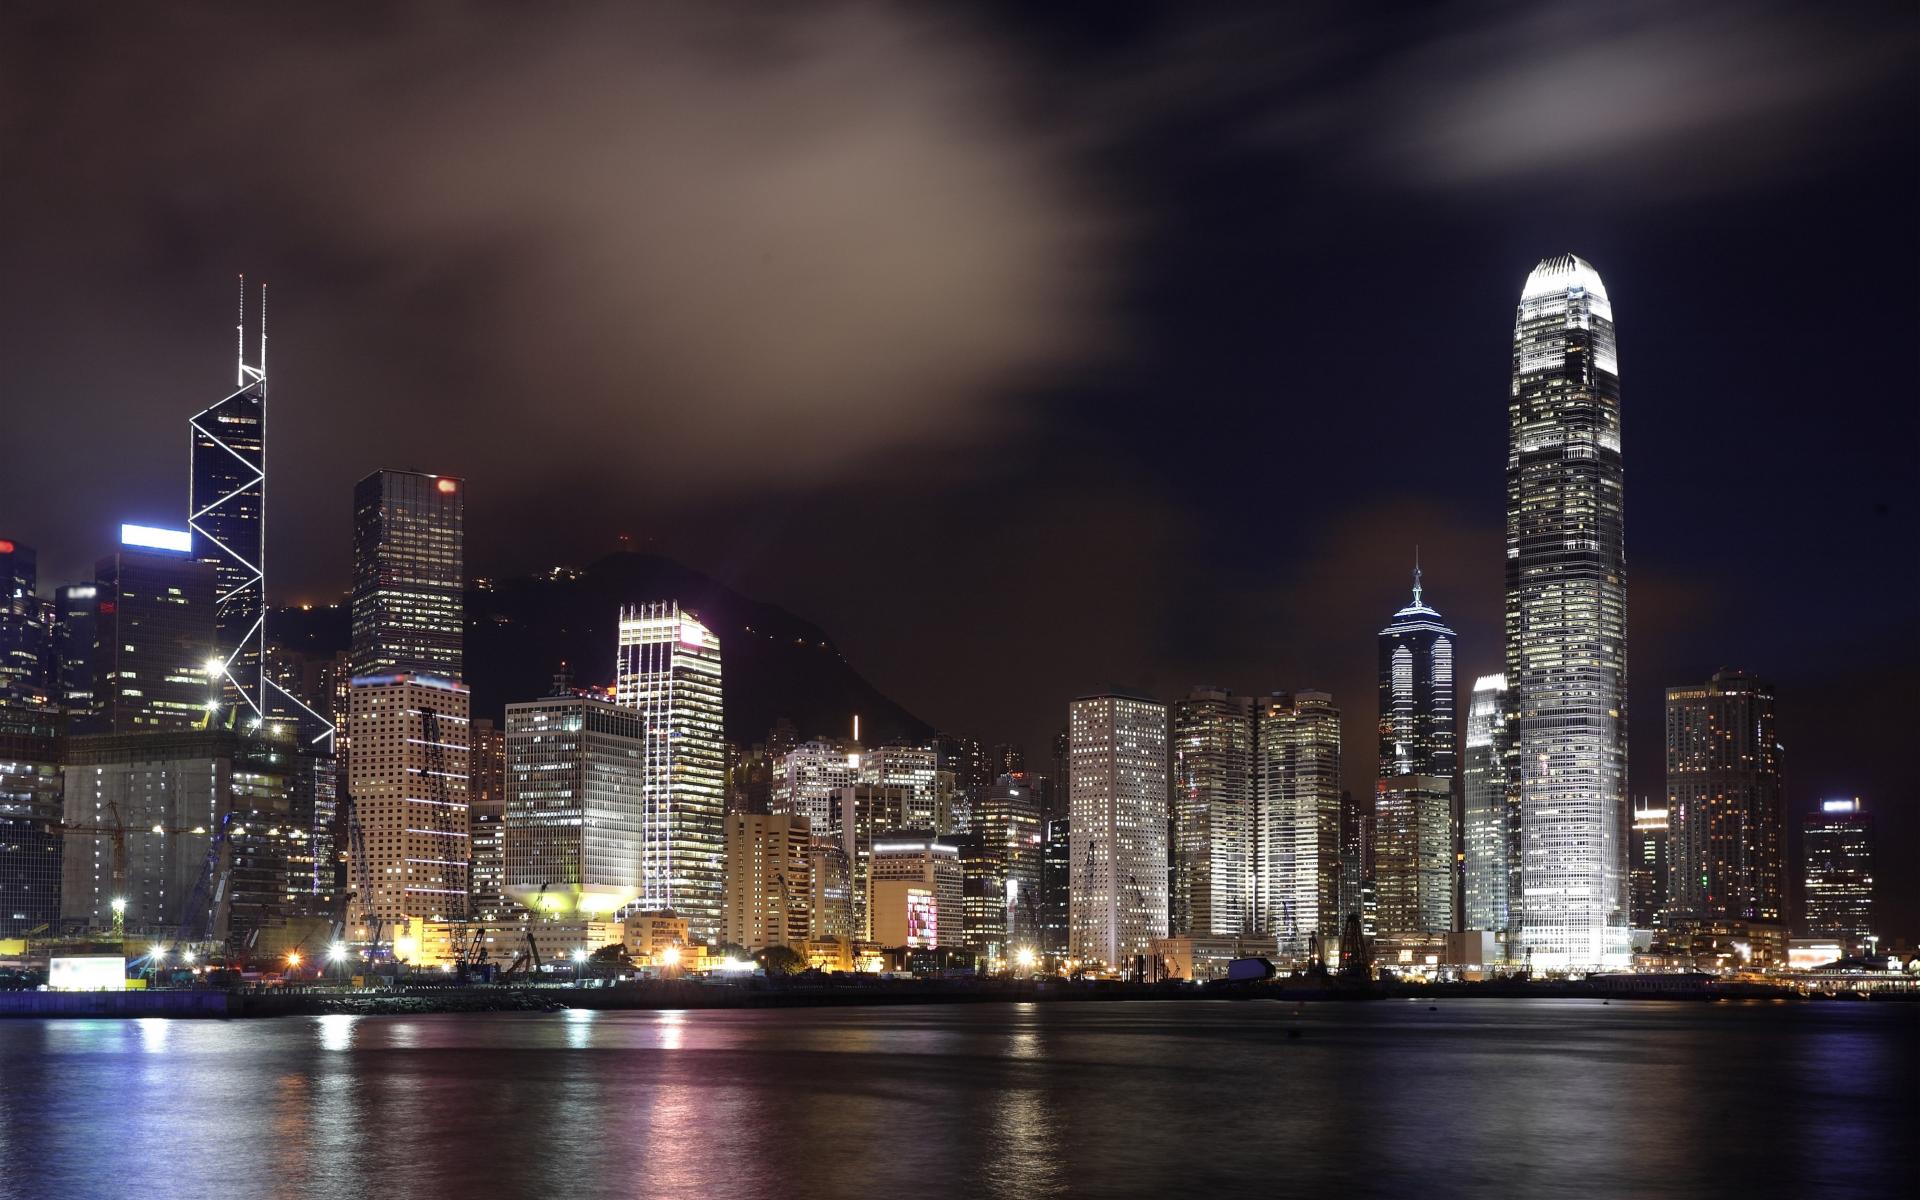 hong, Kong, World, Cities, Architecture, Buildings, Skyscrapers, Window, Glass, Steel, Metal, Skyline, Cityscape, Night, Lights, Sky, Clouds, Hdr, Rivers, Bay, Marina, Water, Reflections, Bridges, Scenic Wallpaper